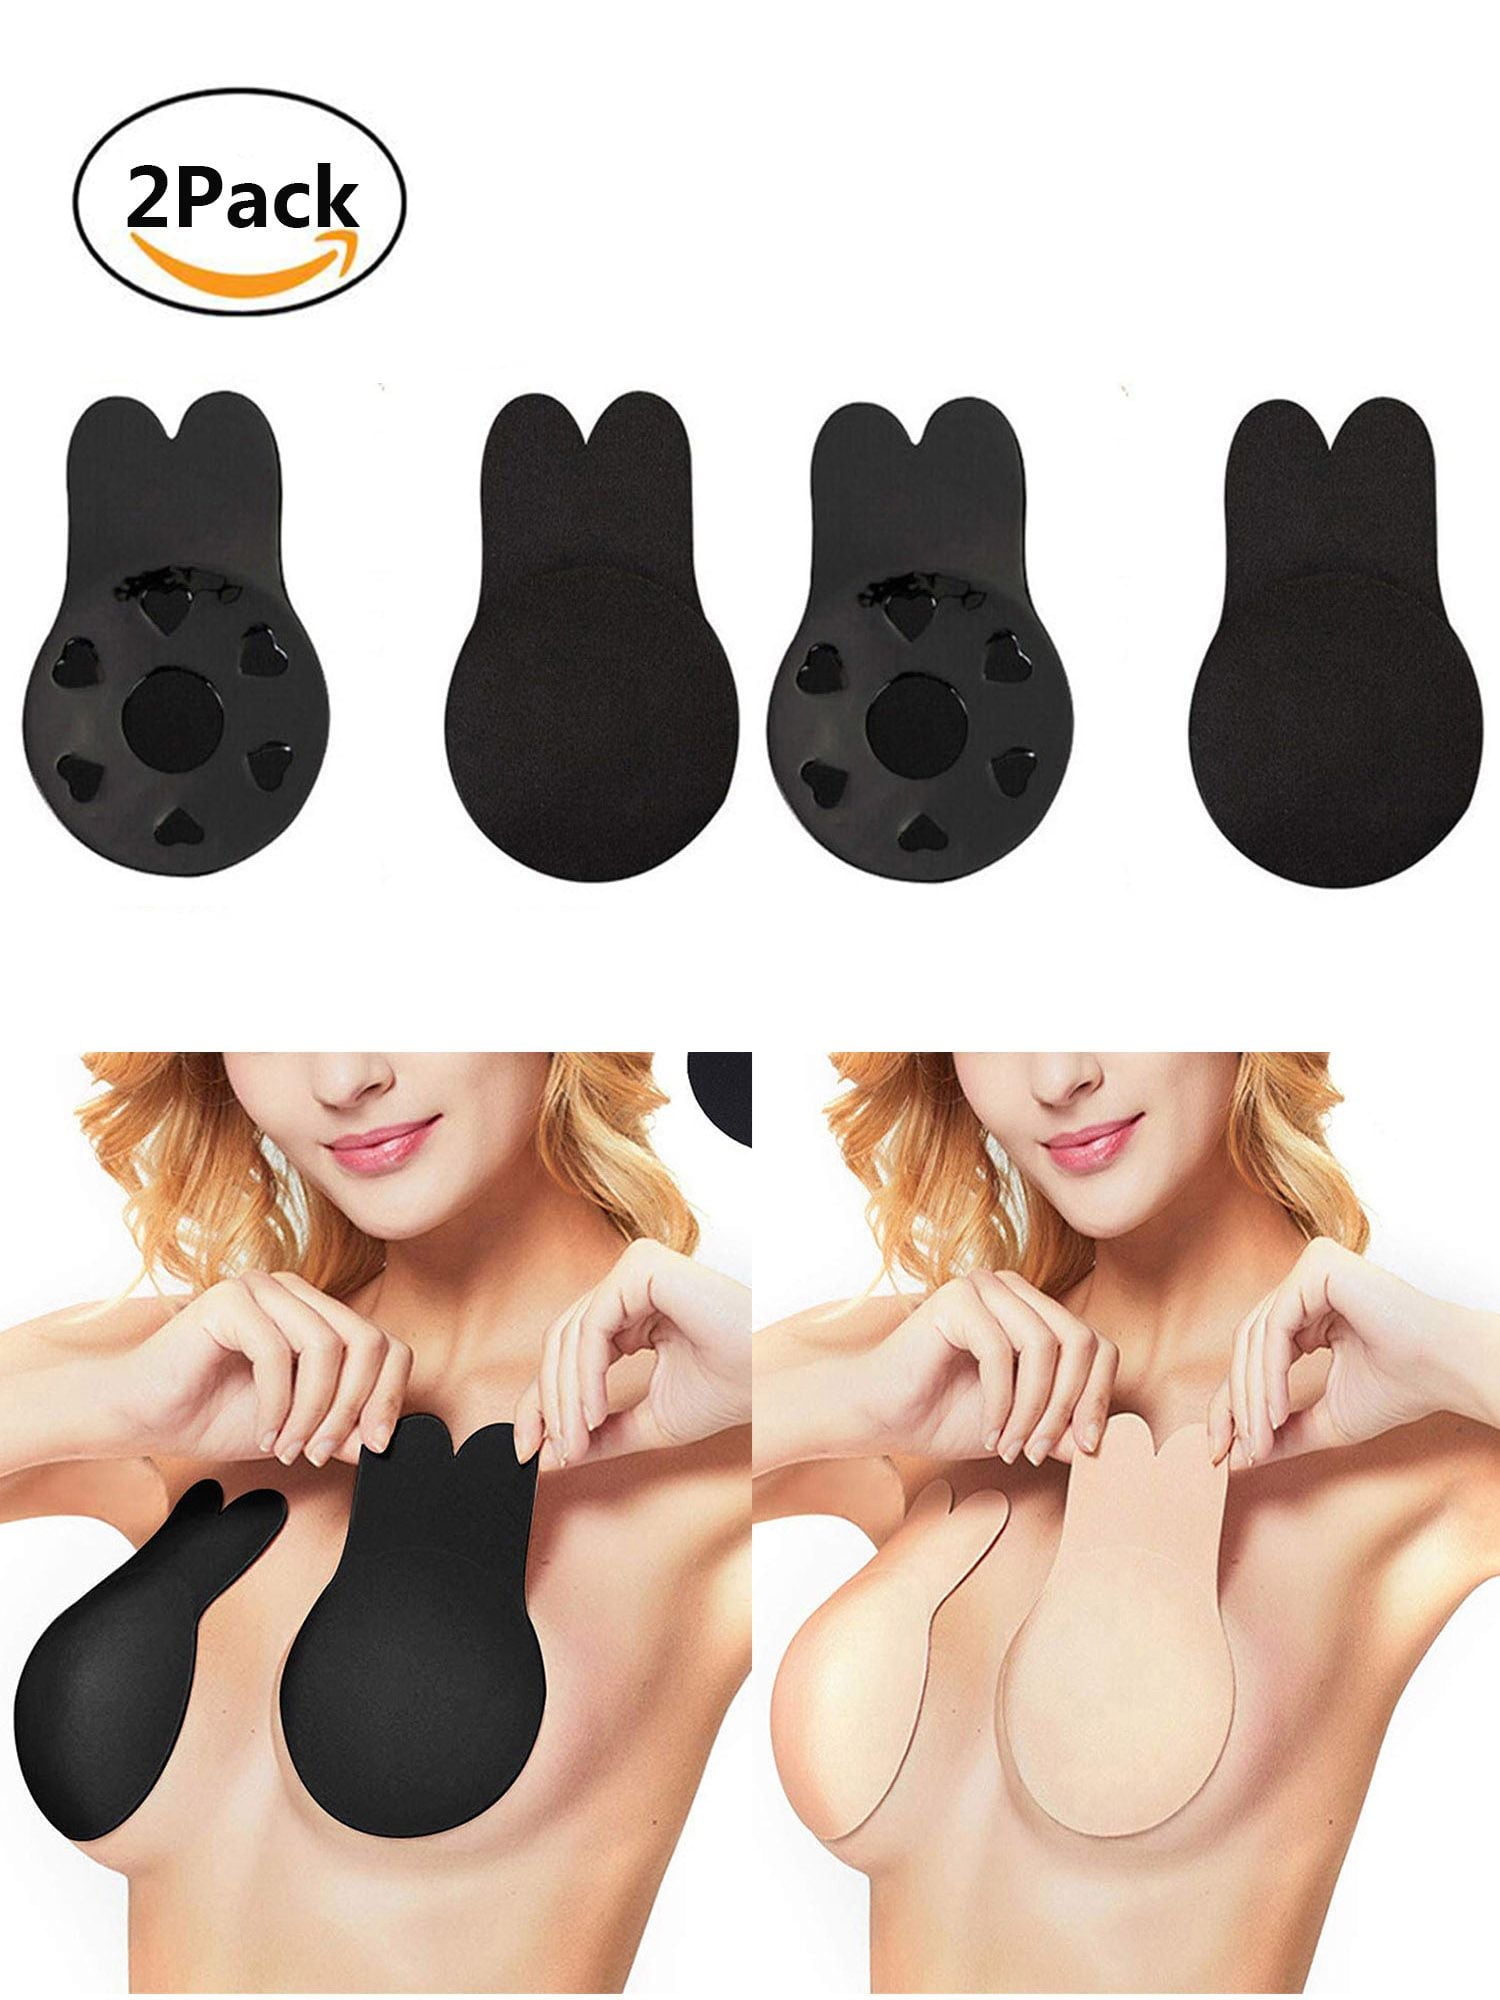 Factory Price Sexy Women's Rabbit Ear Silicone Self Adhesive Push